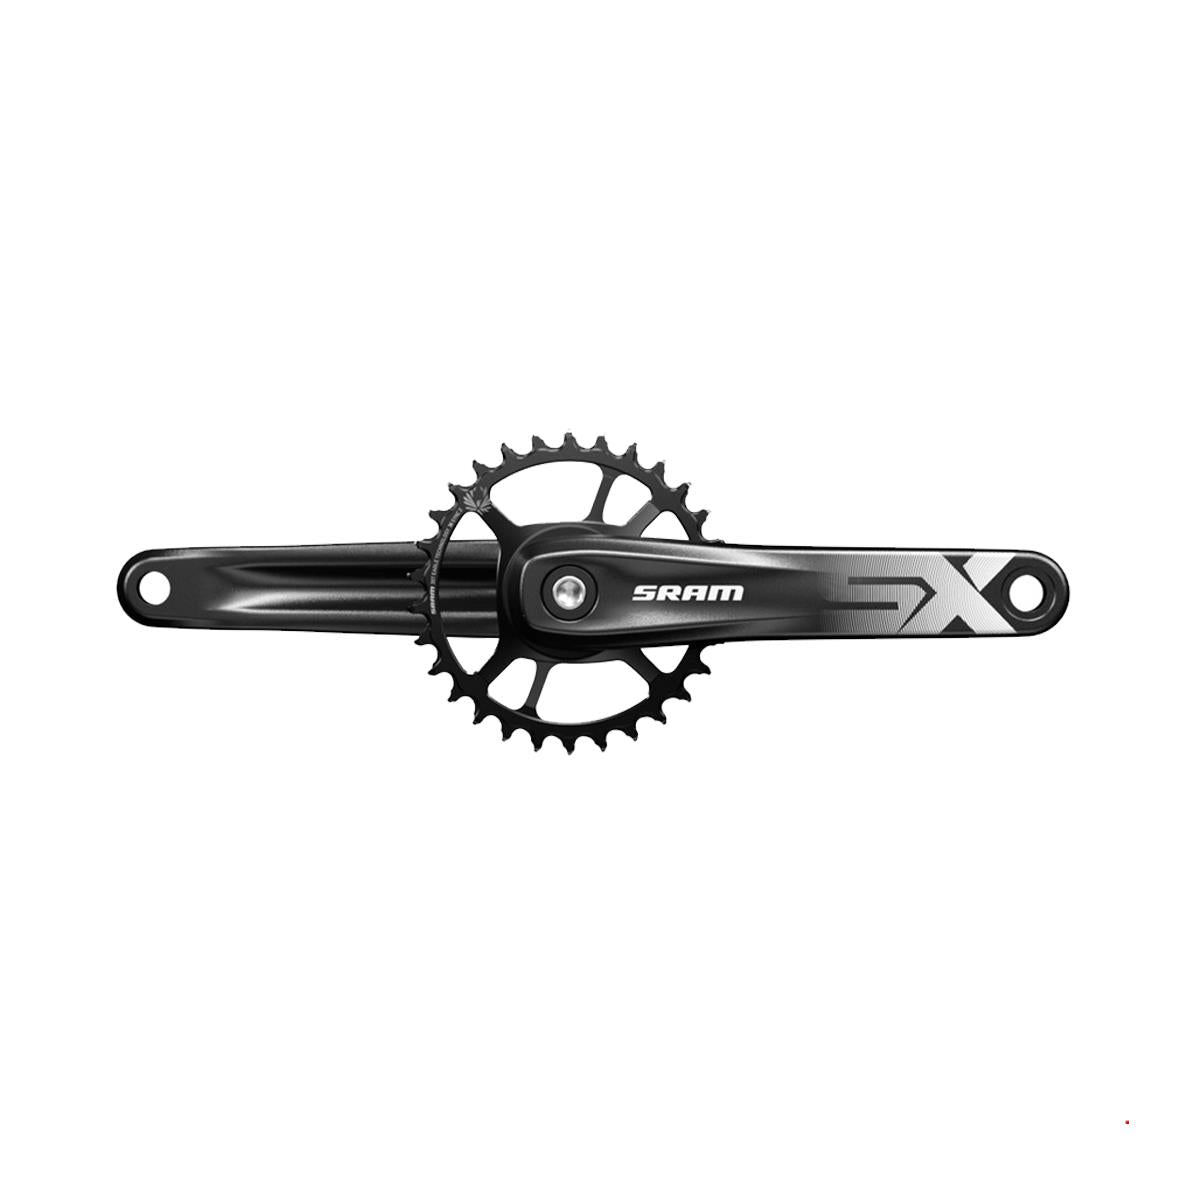 Sram Crankset Sx Eagle Powerspline 12S With Direct Mount 32T X-Sync 2 Steel Chainring A1